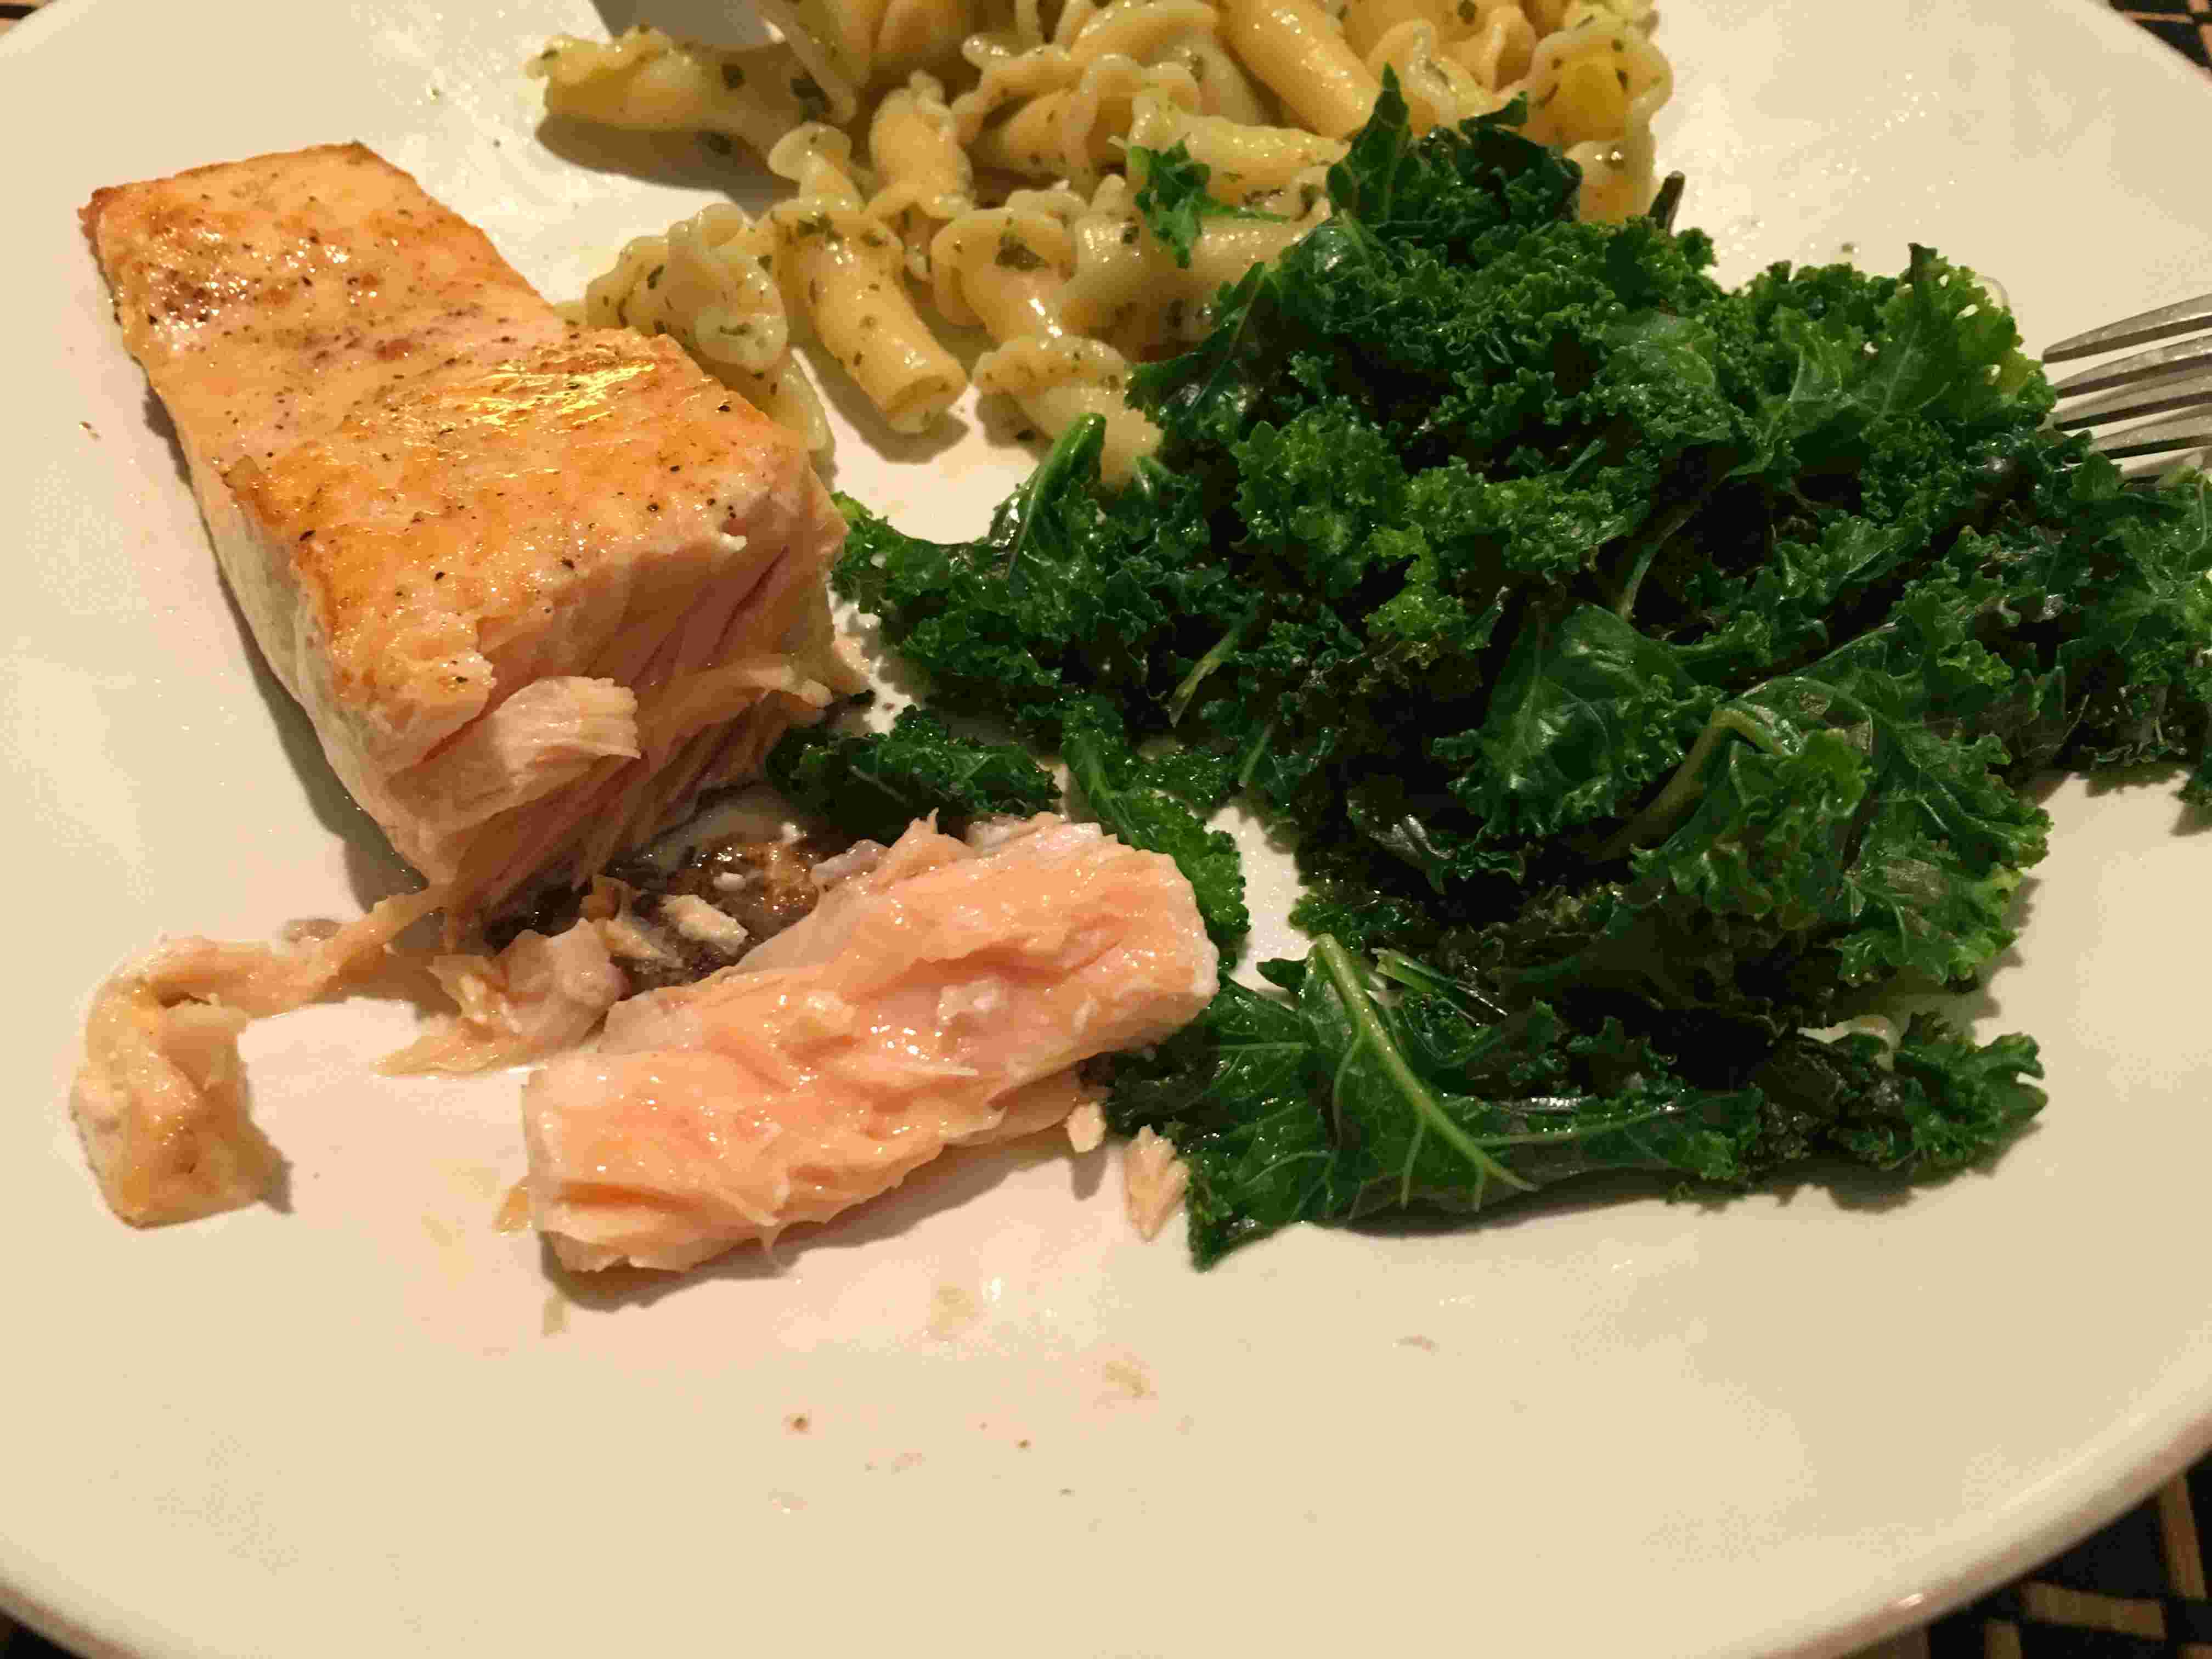 We like our salmon cooked medium rare to medium - you can see it's still a bit pink in the middle.